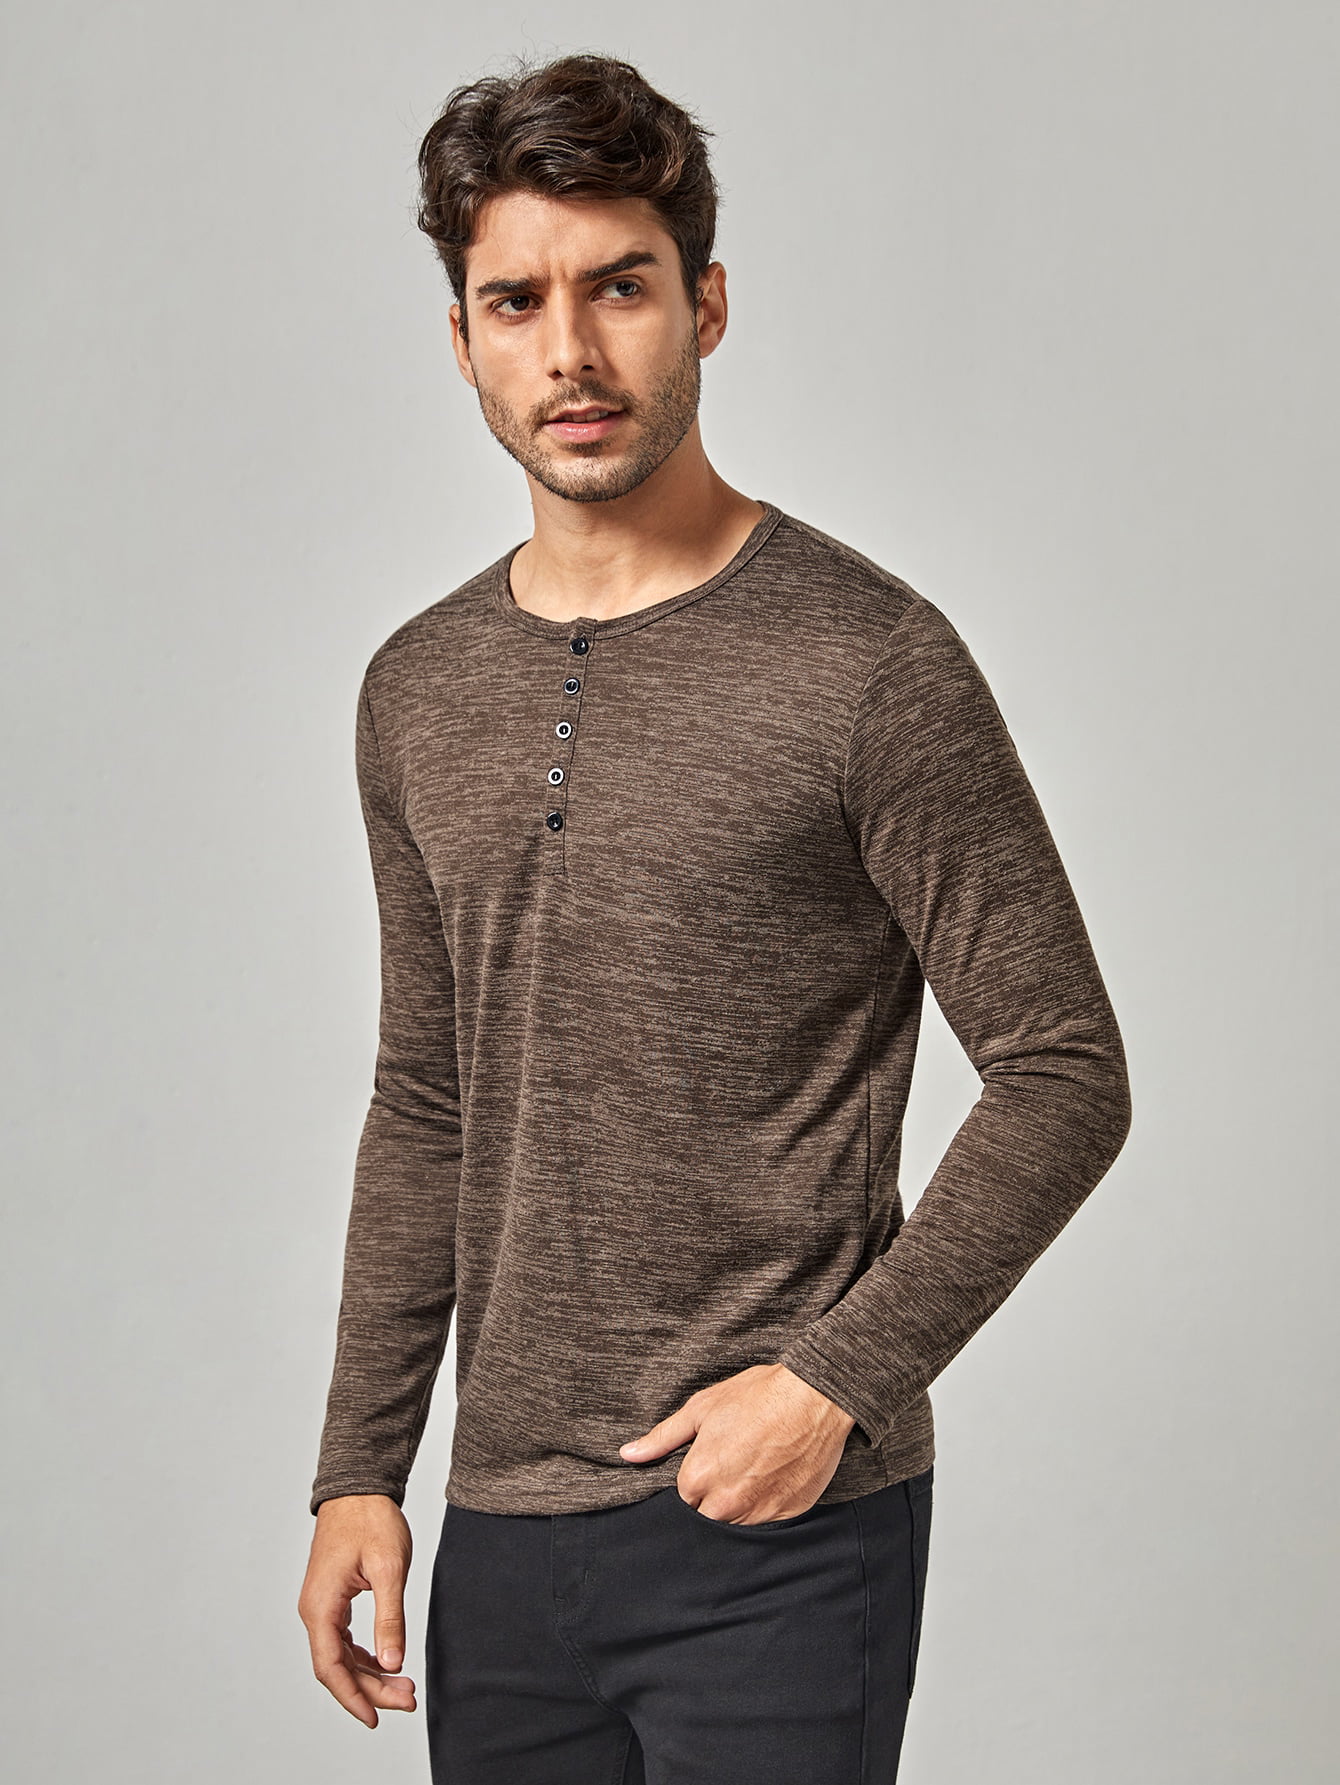 Losait Mens Single Breasted Splice Long-Sleeve Relaxed Classic T-Shirts